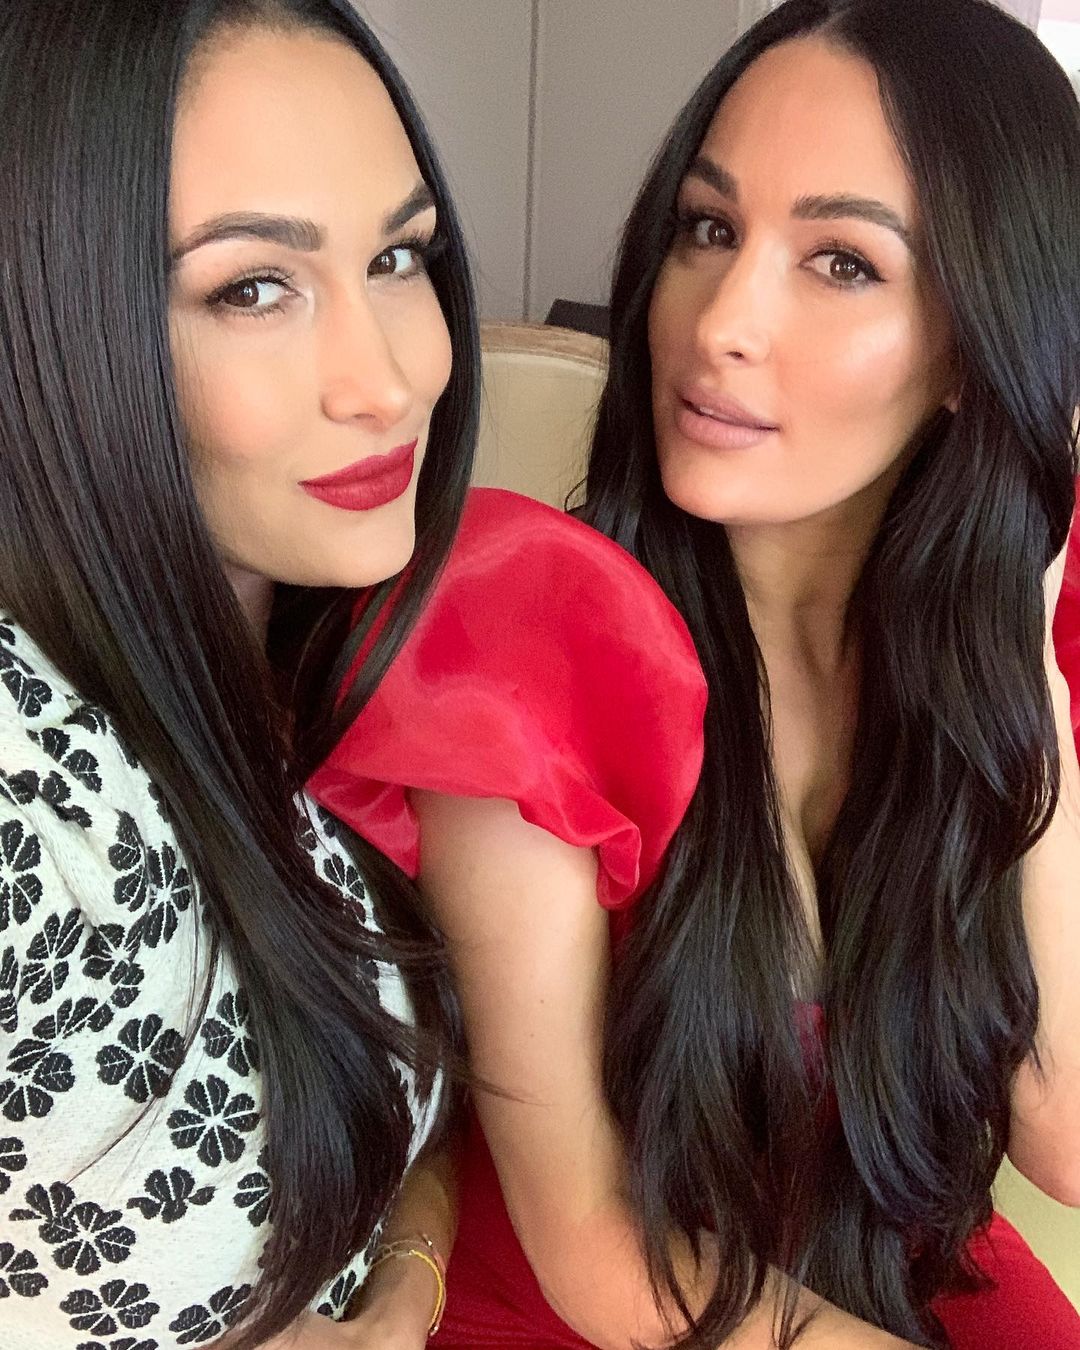 A beautiful selfie featuring Nikki and Brie Bella, with incredib